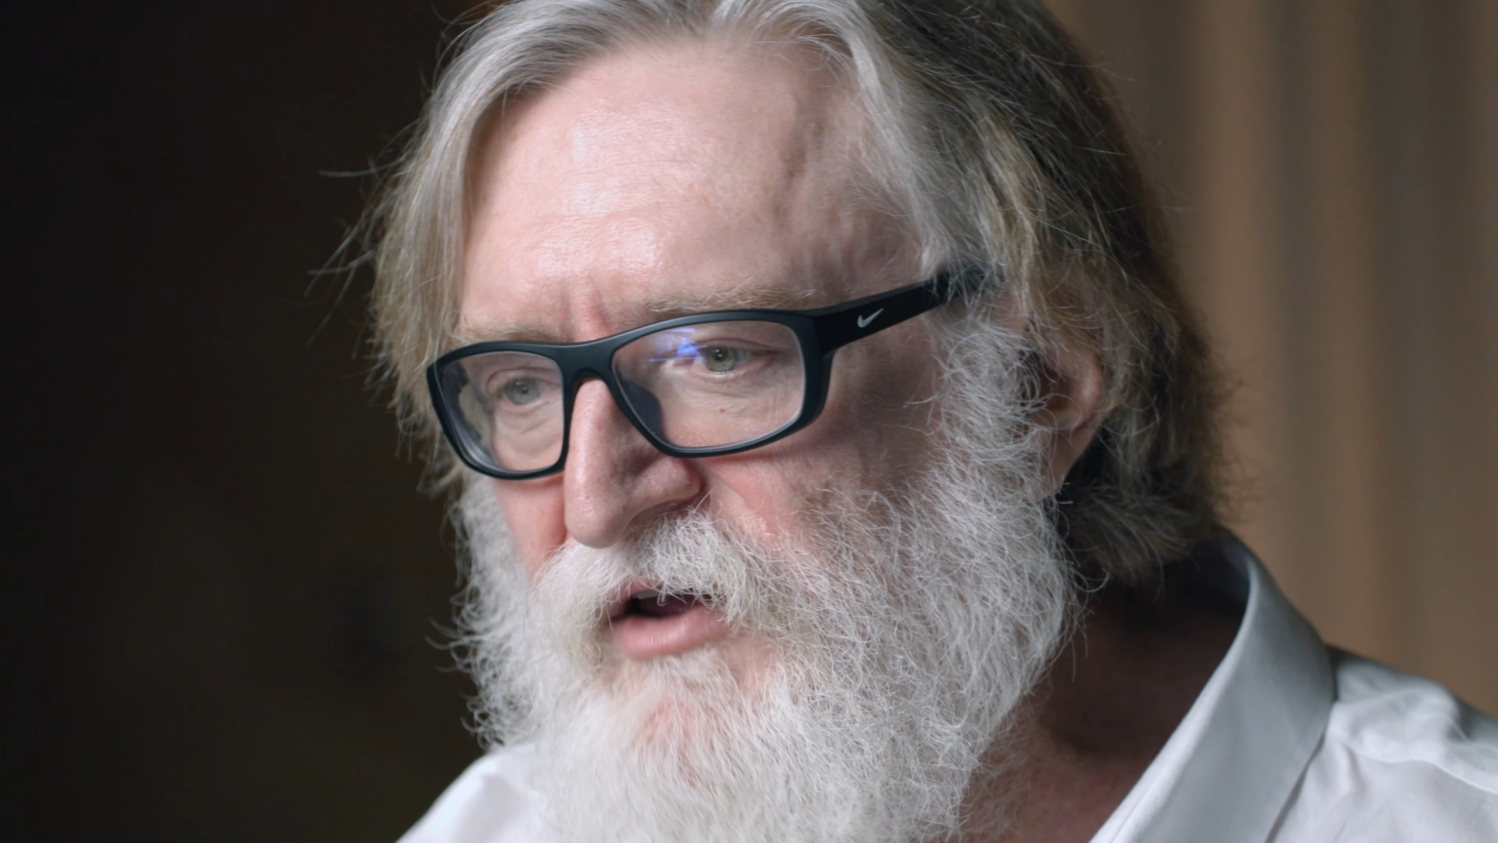 Watch Gabe Newell Talk About Valve's Business - Game Informer